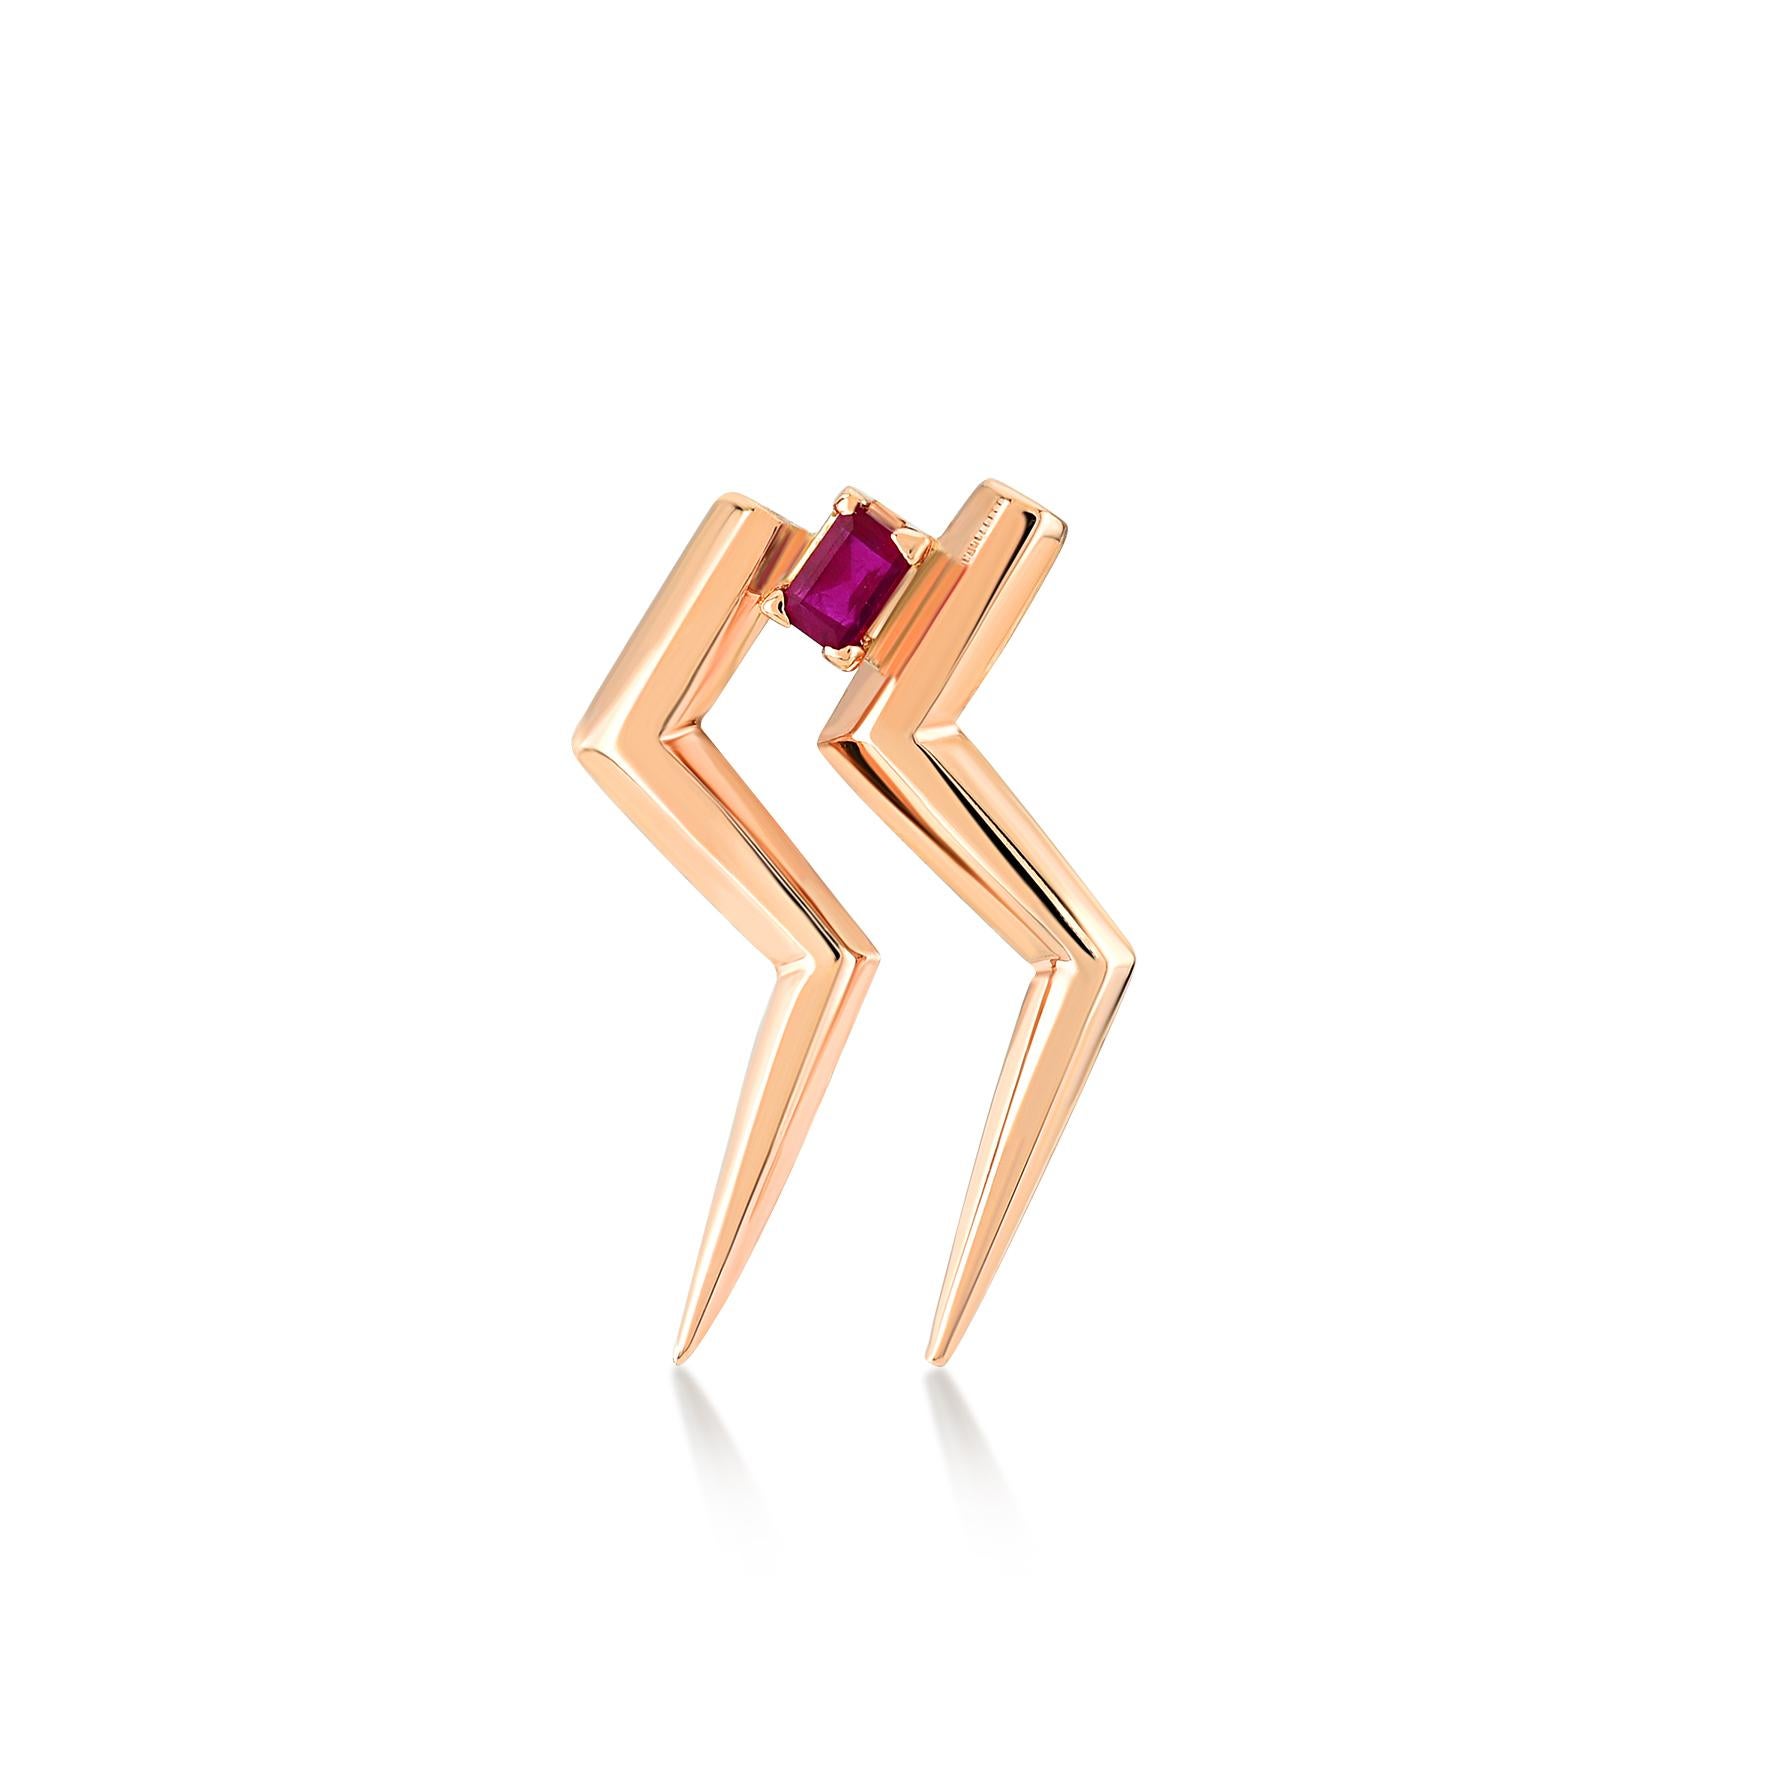 Ruby double sided lightning 14k rose gold earring (single) by Selda Jewellery

Additional Information:-
Collection: Thunder Collection
14k Rose gold
0.17ct Ruby
Height 3cm